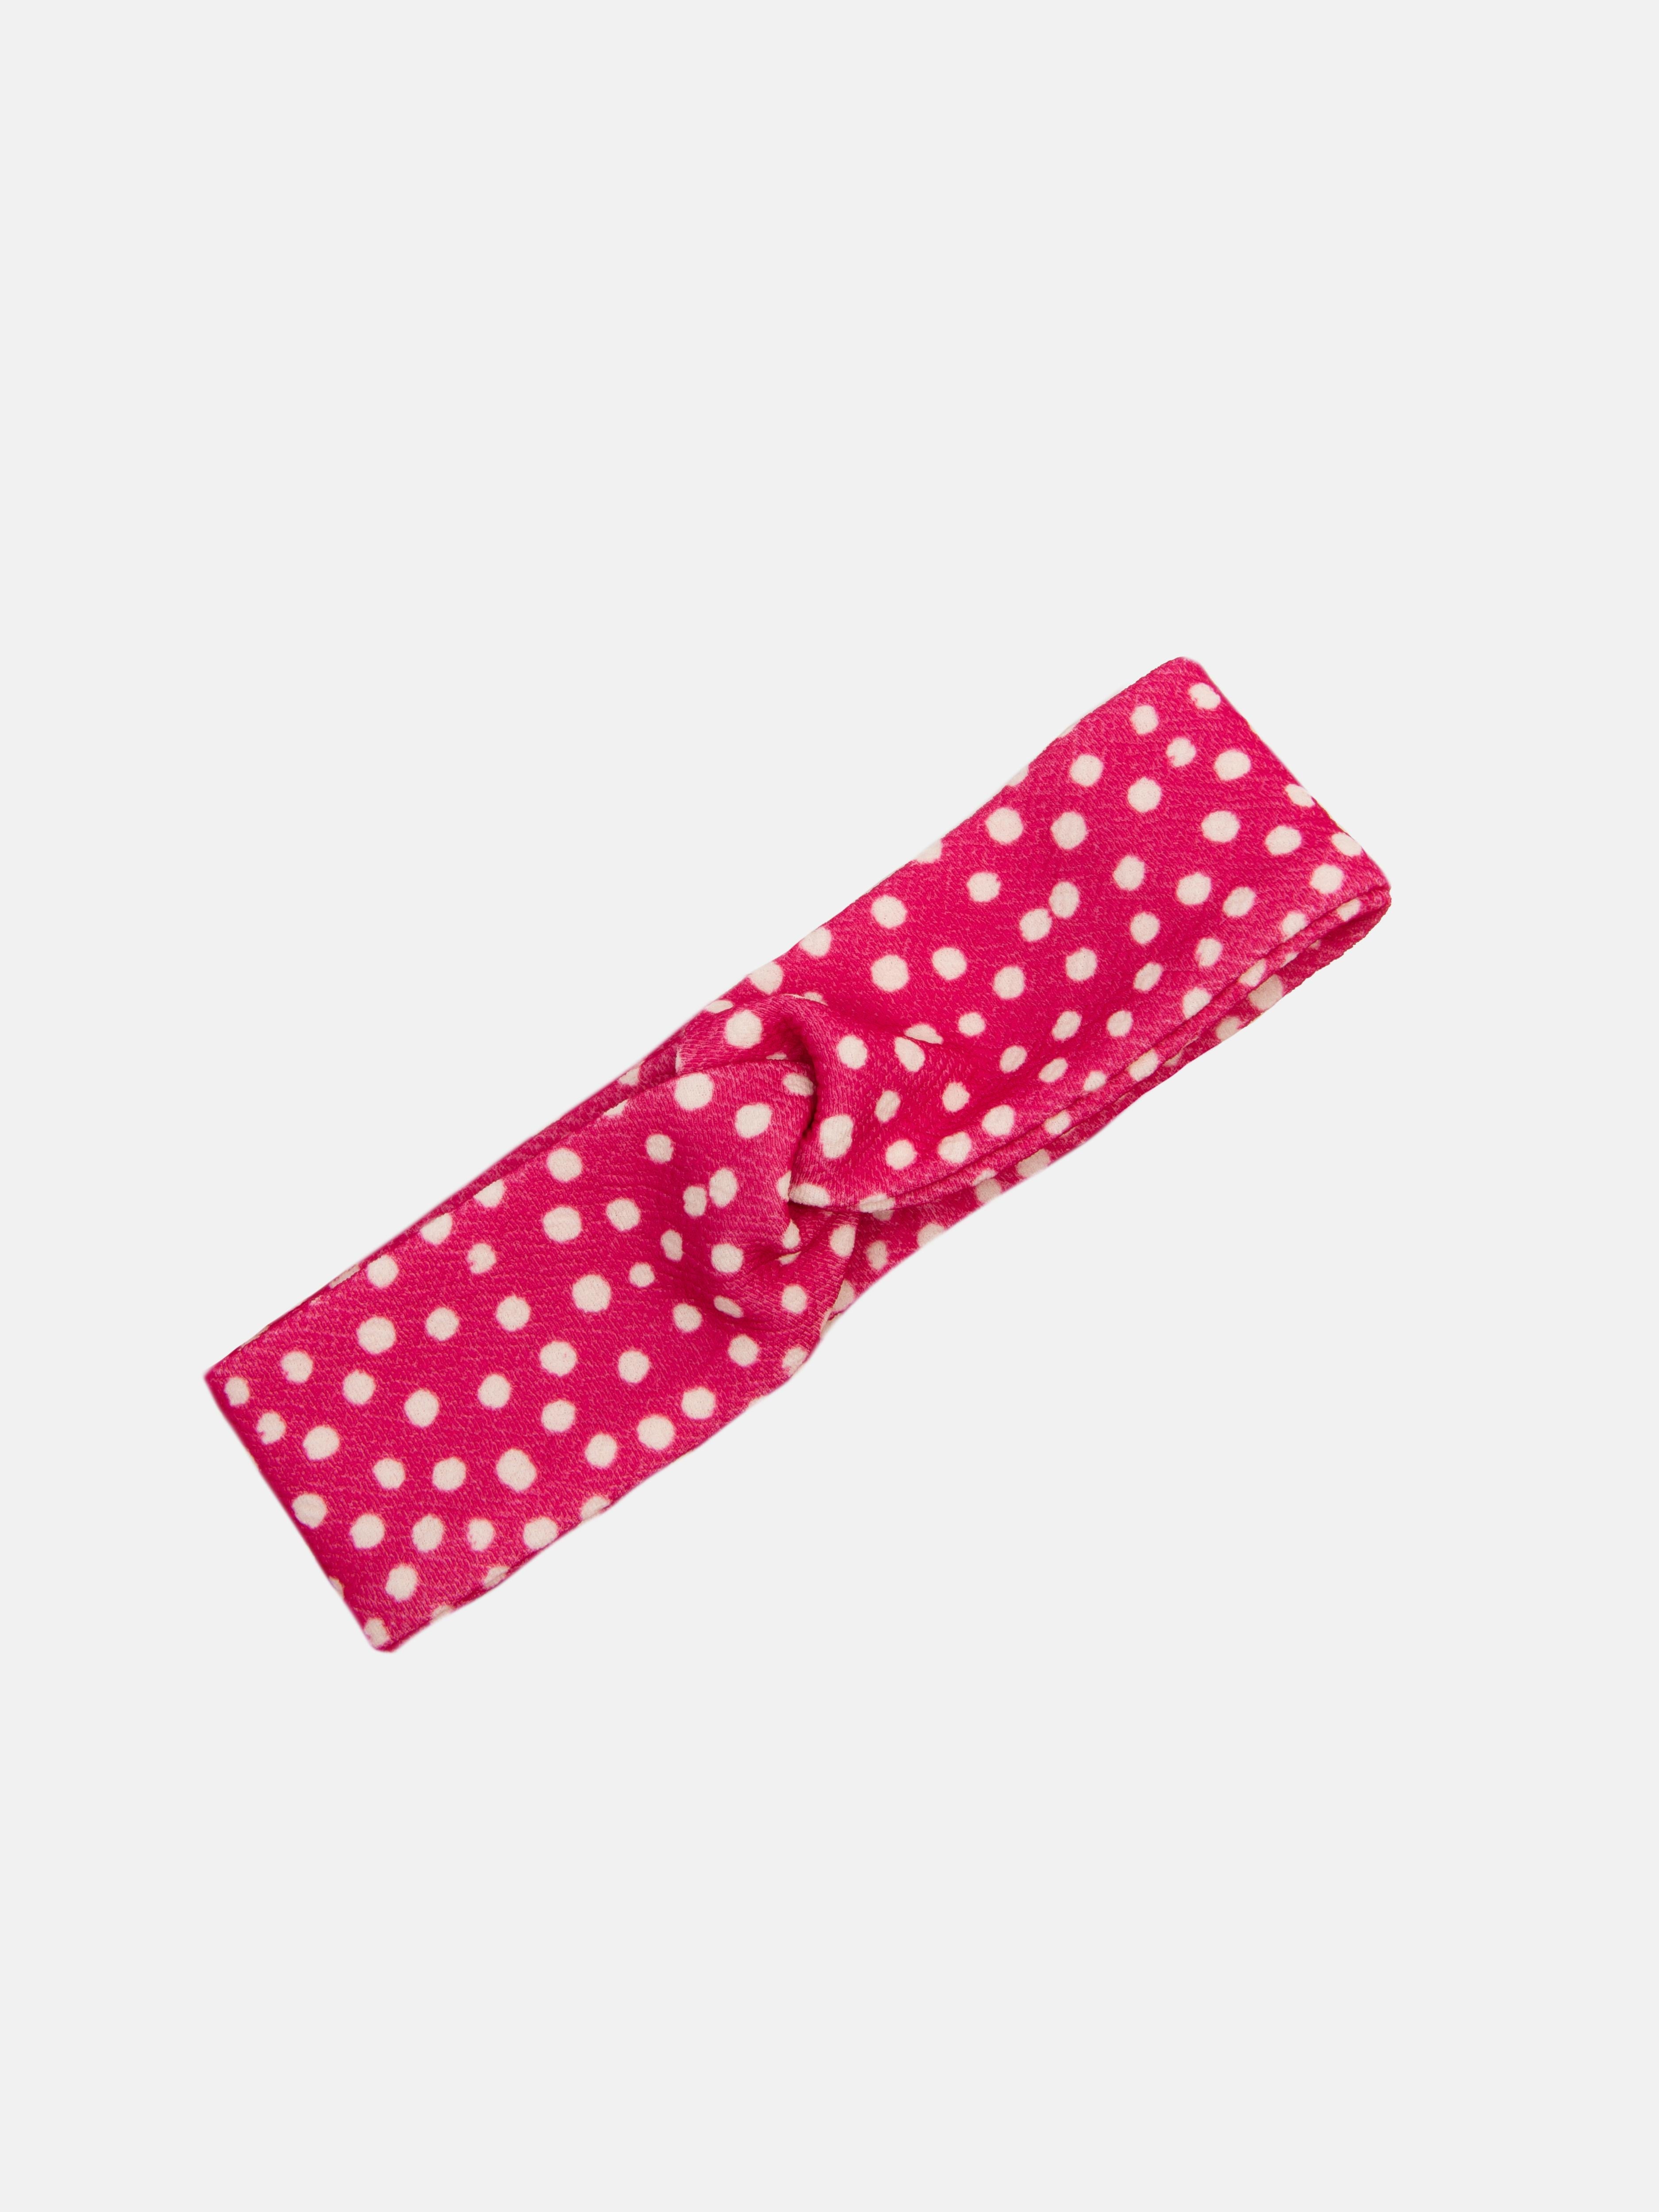 Baby Girl Kitty Cat French Collection 3-piece Polka Dot Top, Pants and Headband Set - Fuchsia Pink